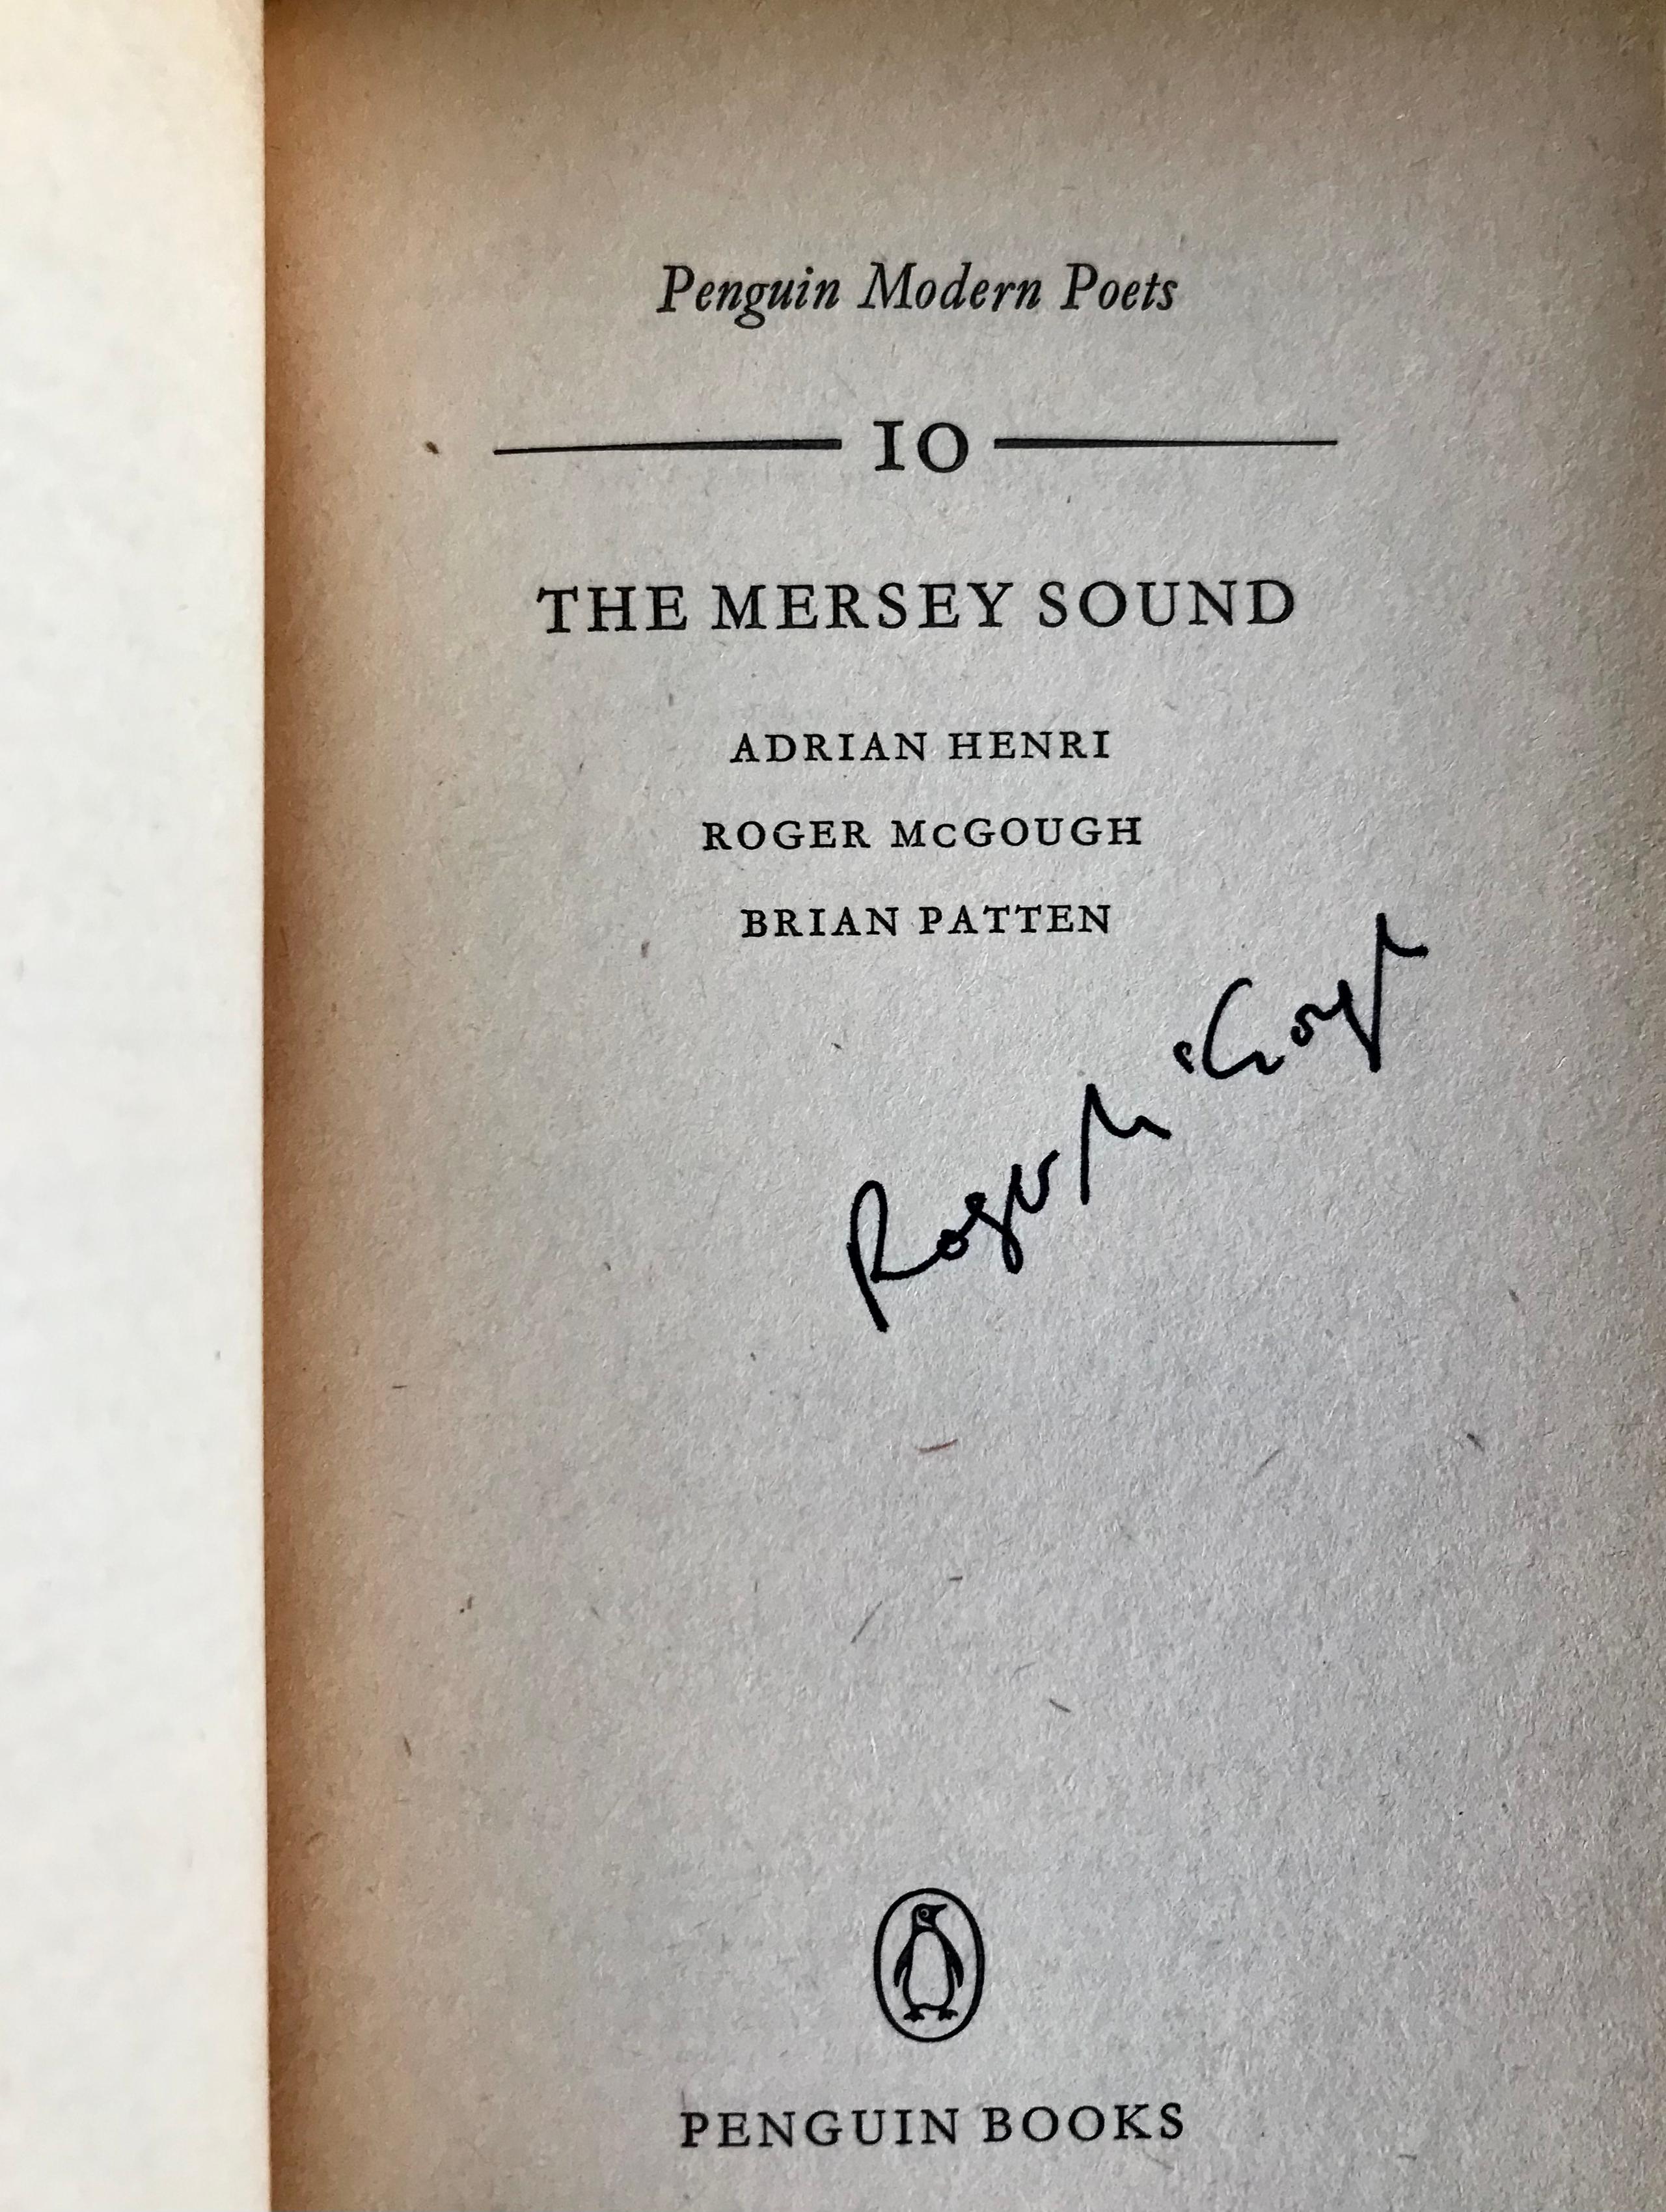 Penguin Modern Poets, The Mersey Sound by Adrian Henri, Rodger McGough & Brian Pattern, Signed